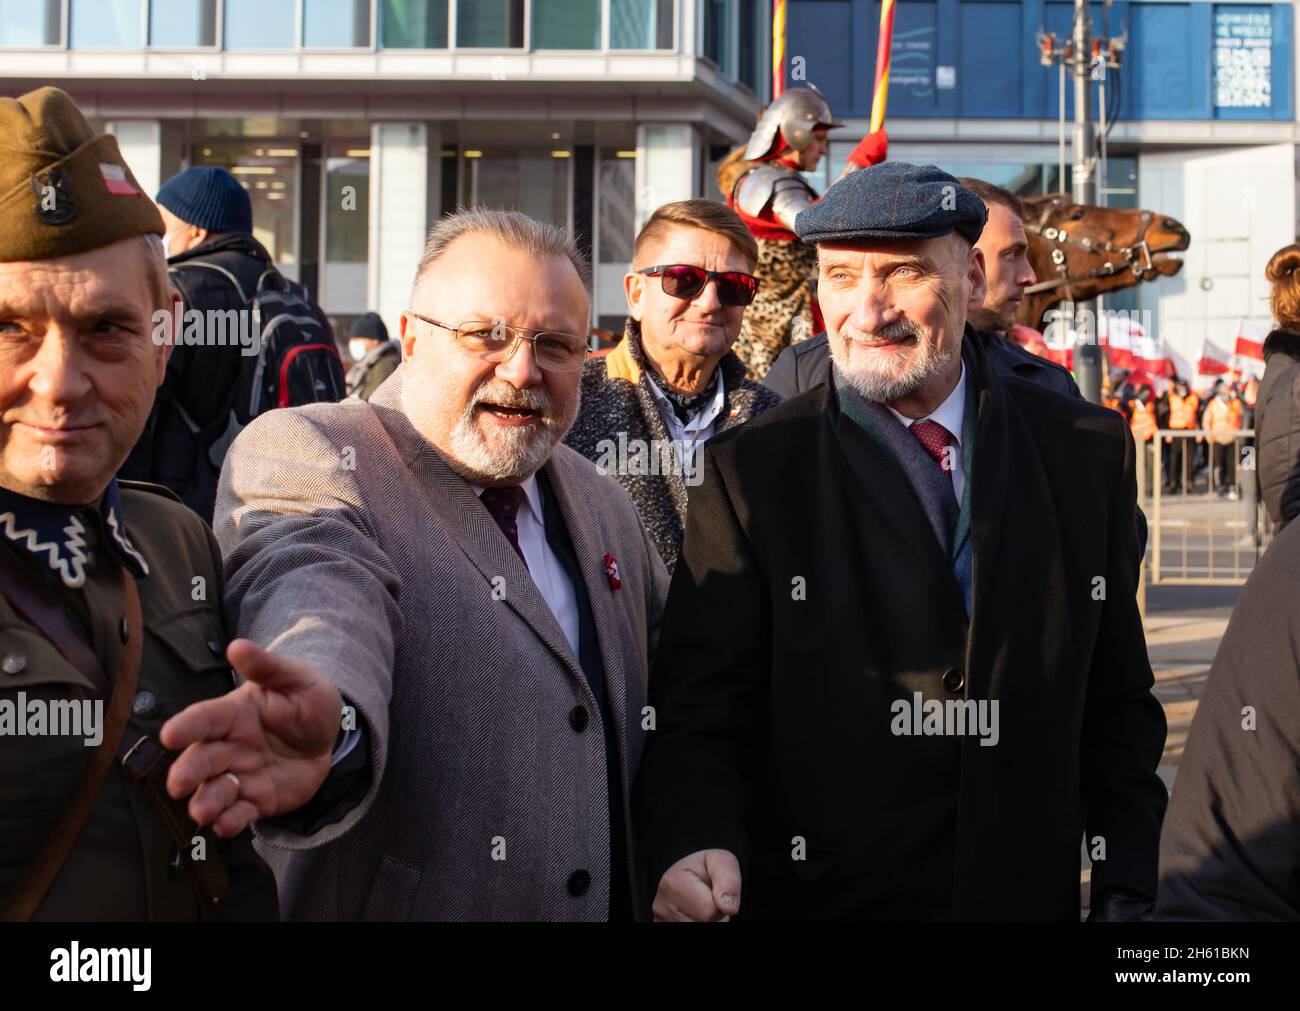 Warszawa, Poland - 11.11.2021: Antoni Macierewicz on the Independece March. National feast and Political conflict dividing the society. Stock Photo